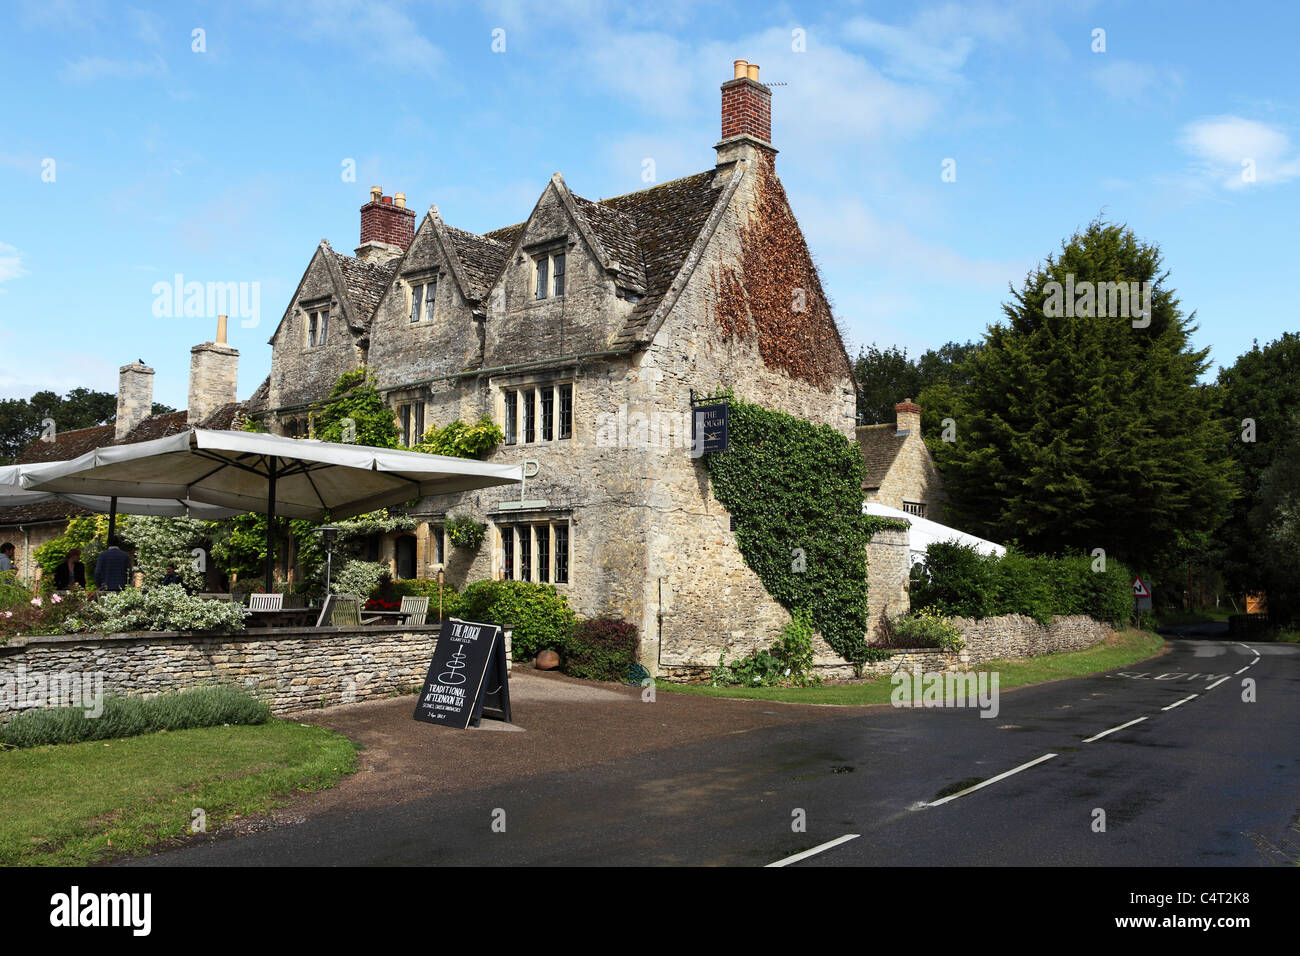 The Plough Hotel in the village of Clanfield, Oxfordshire, England. Stock Photo